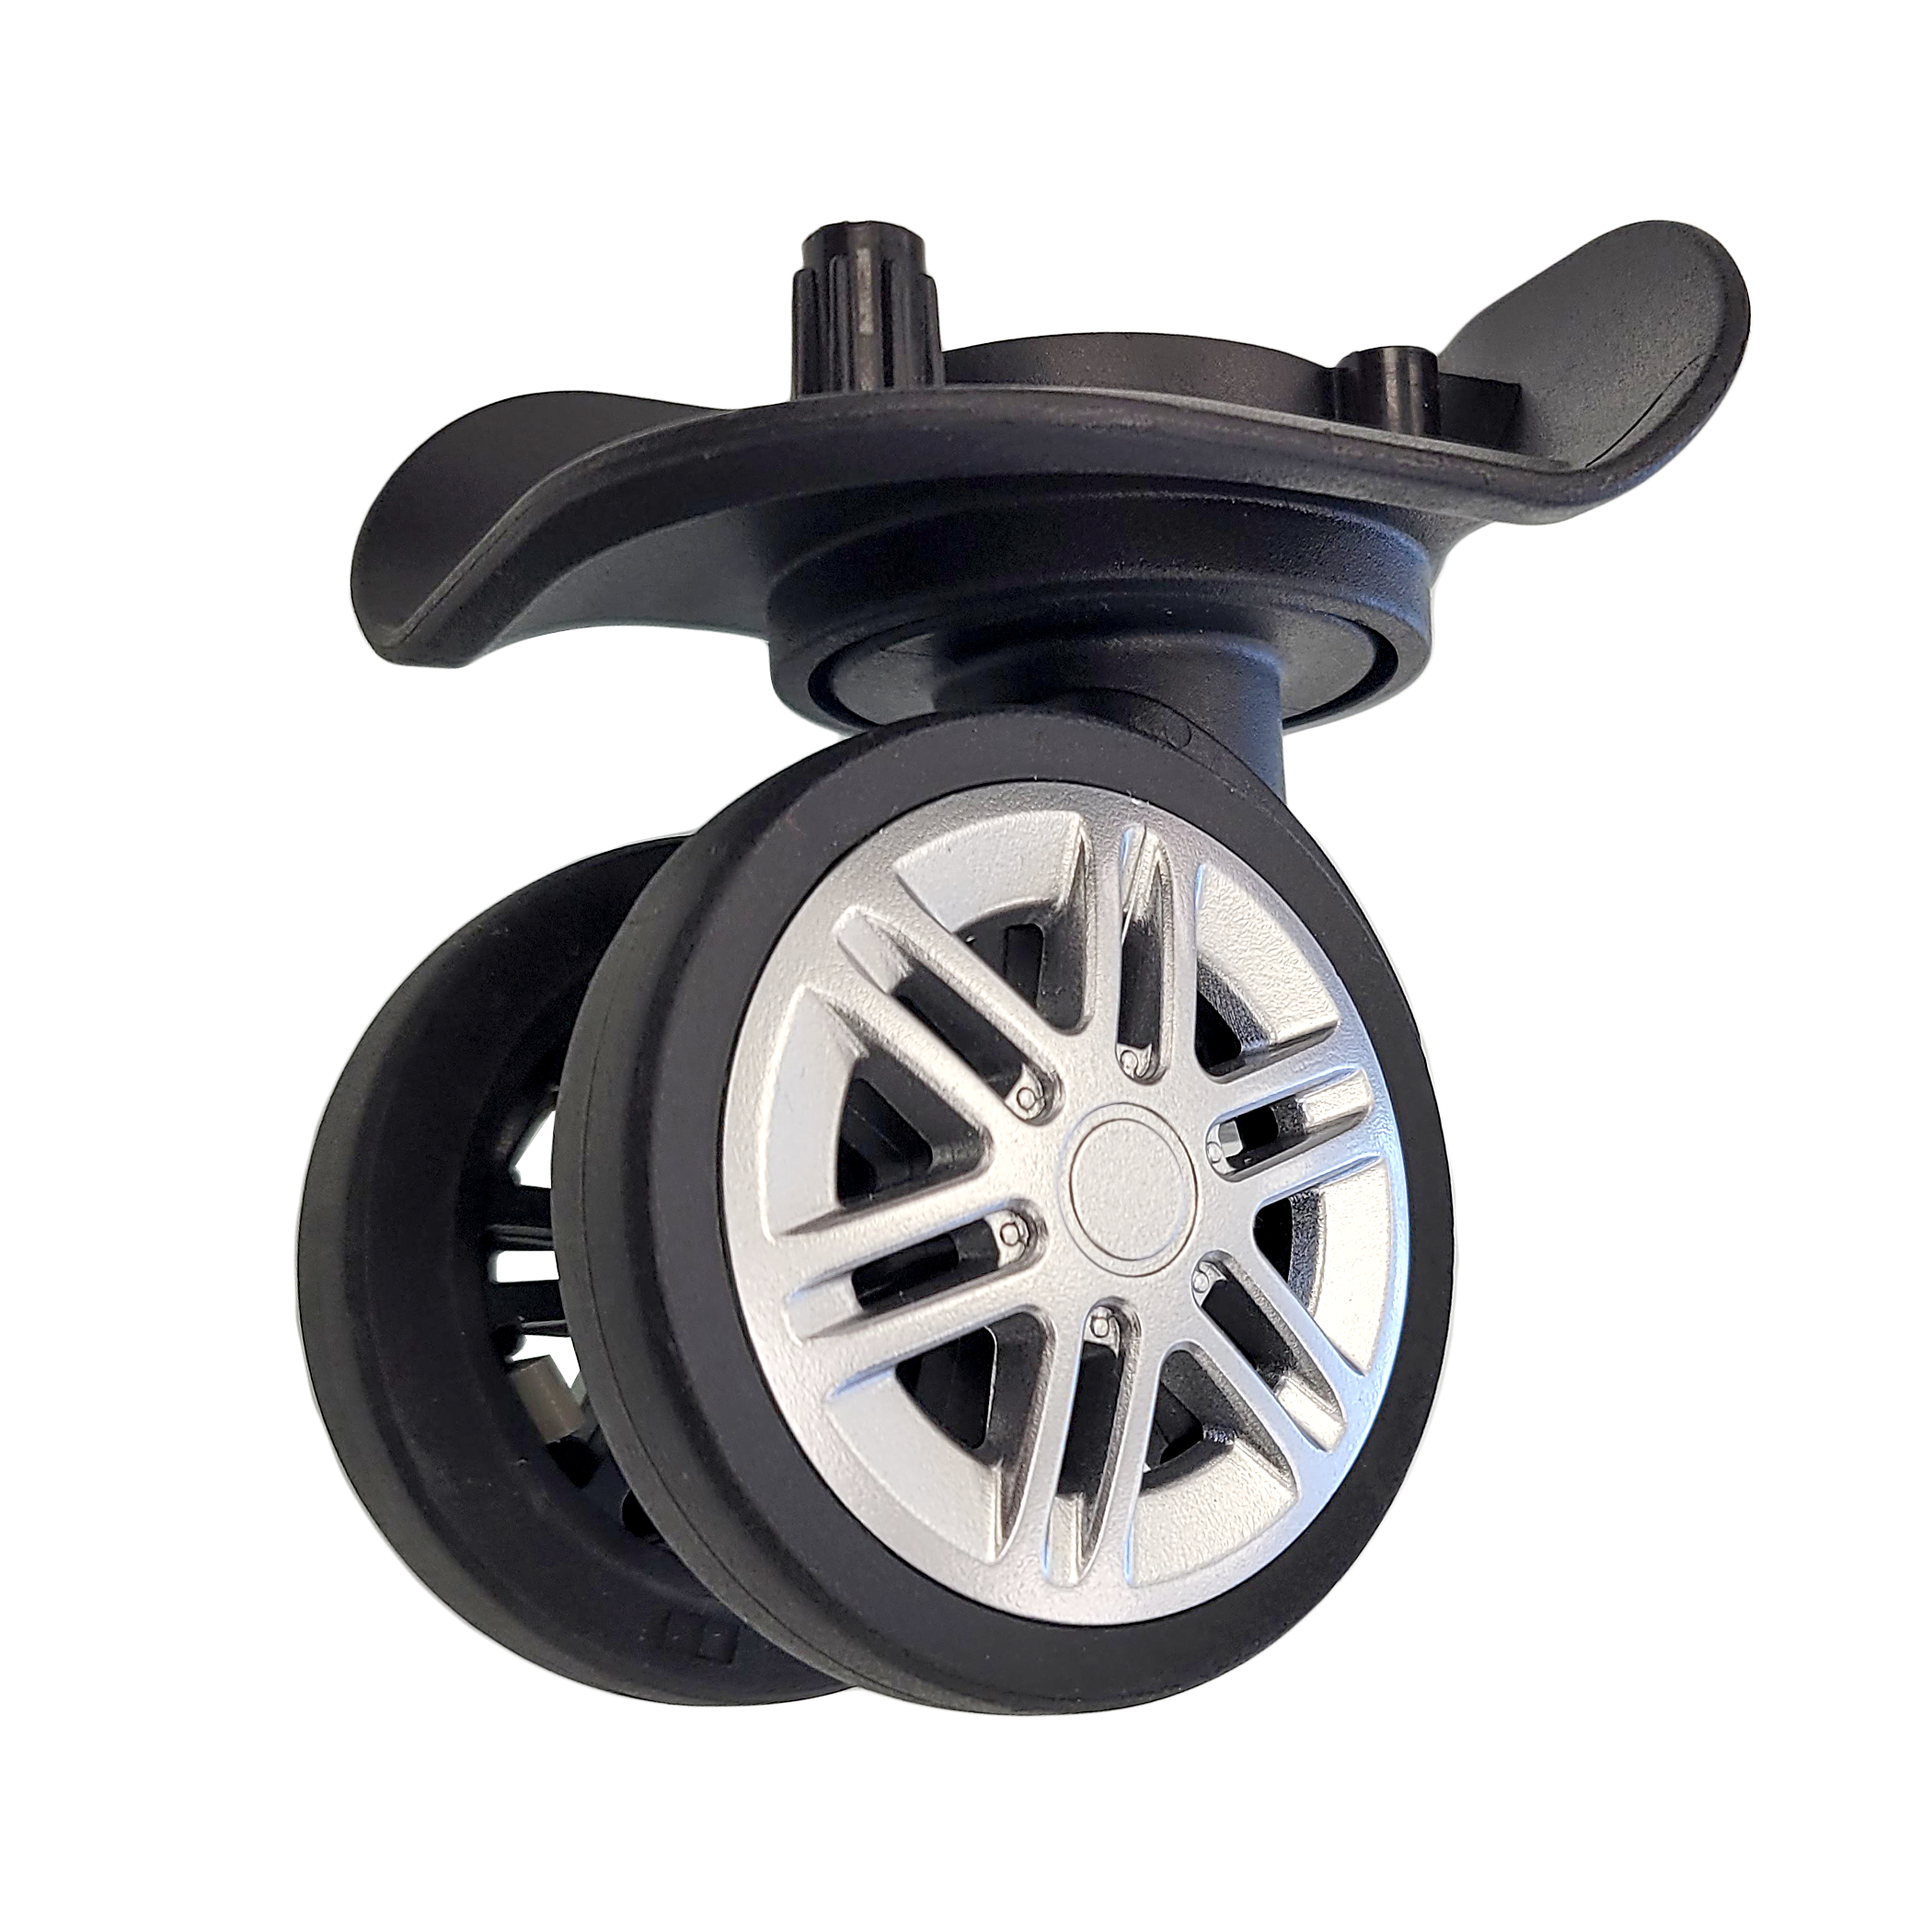 TUCCI Italy Non-detachable Lightweight Wheels with Casting for Luggage (Set of 2)